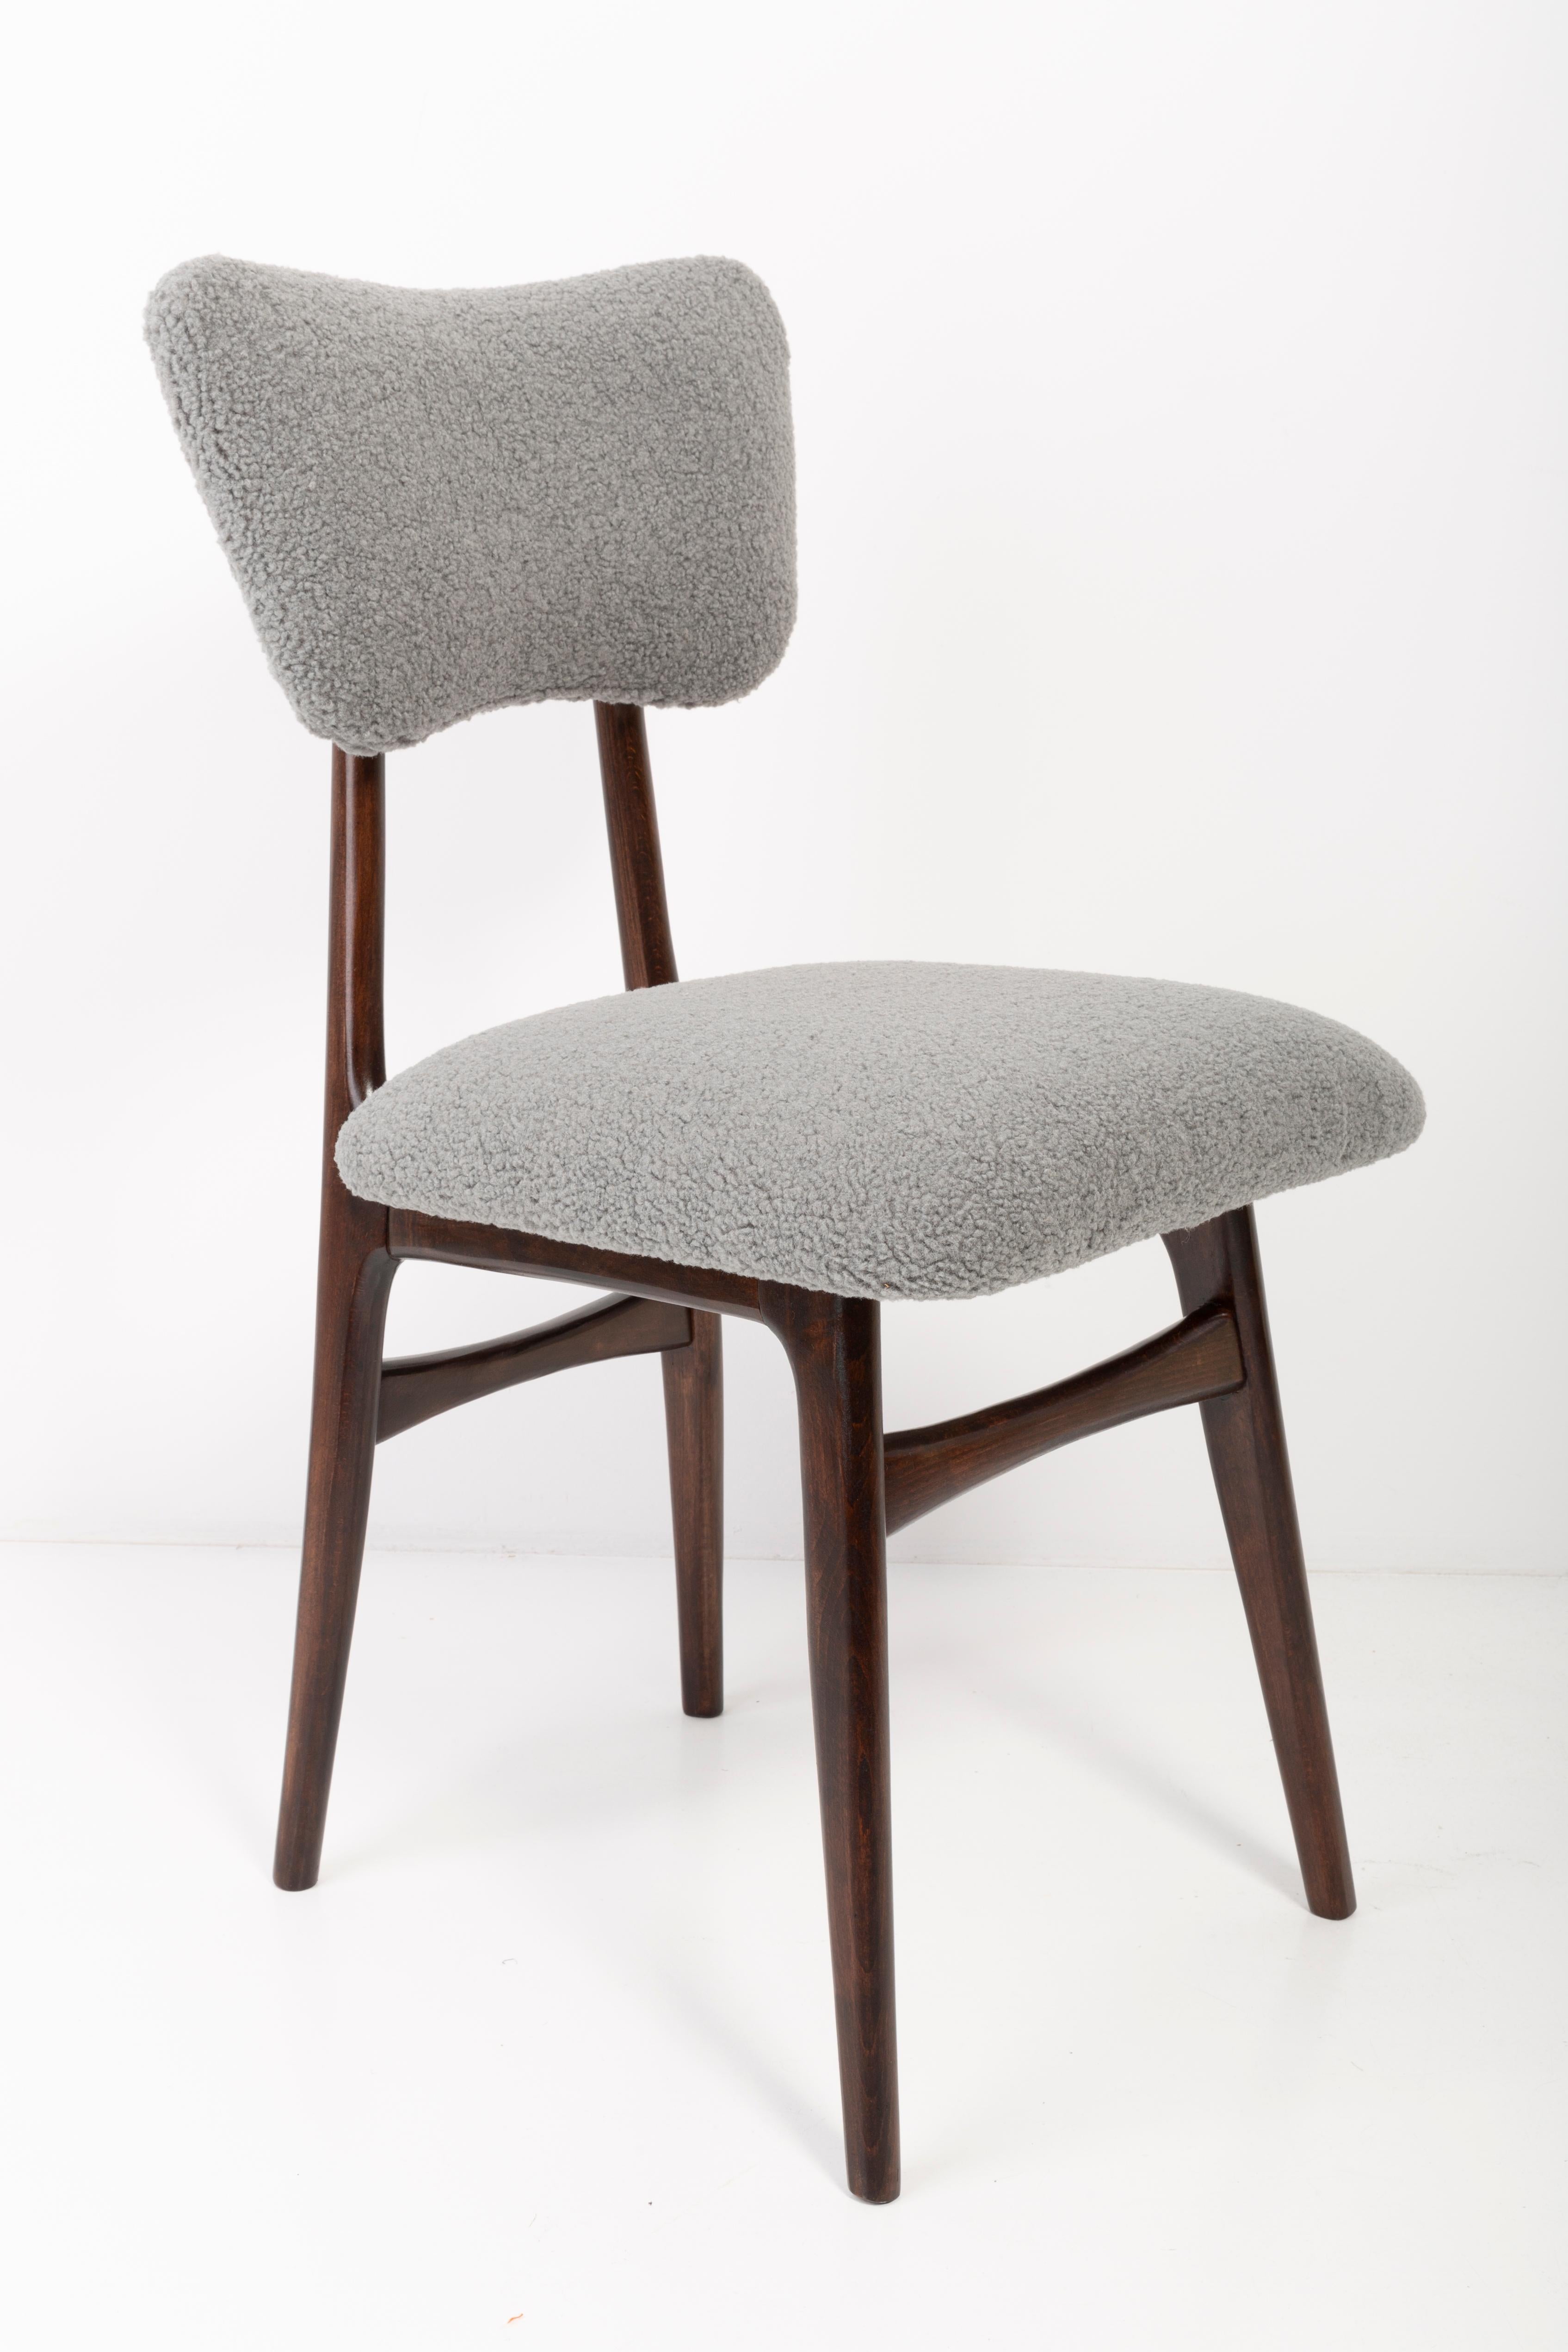 Chairs designed by Prof. Rajmund Halas. Made of beechwood. Chair is after a complete upholstery renovation, the woodwork has been refreshed. Seat and back is dressed in gray, durable and pleasant to the touch boucle fabric. Chair is stable and very